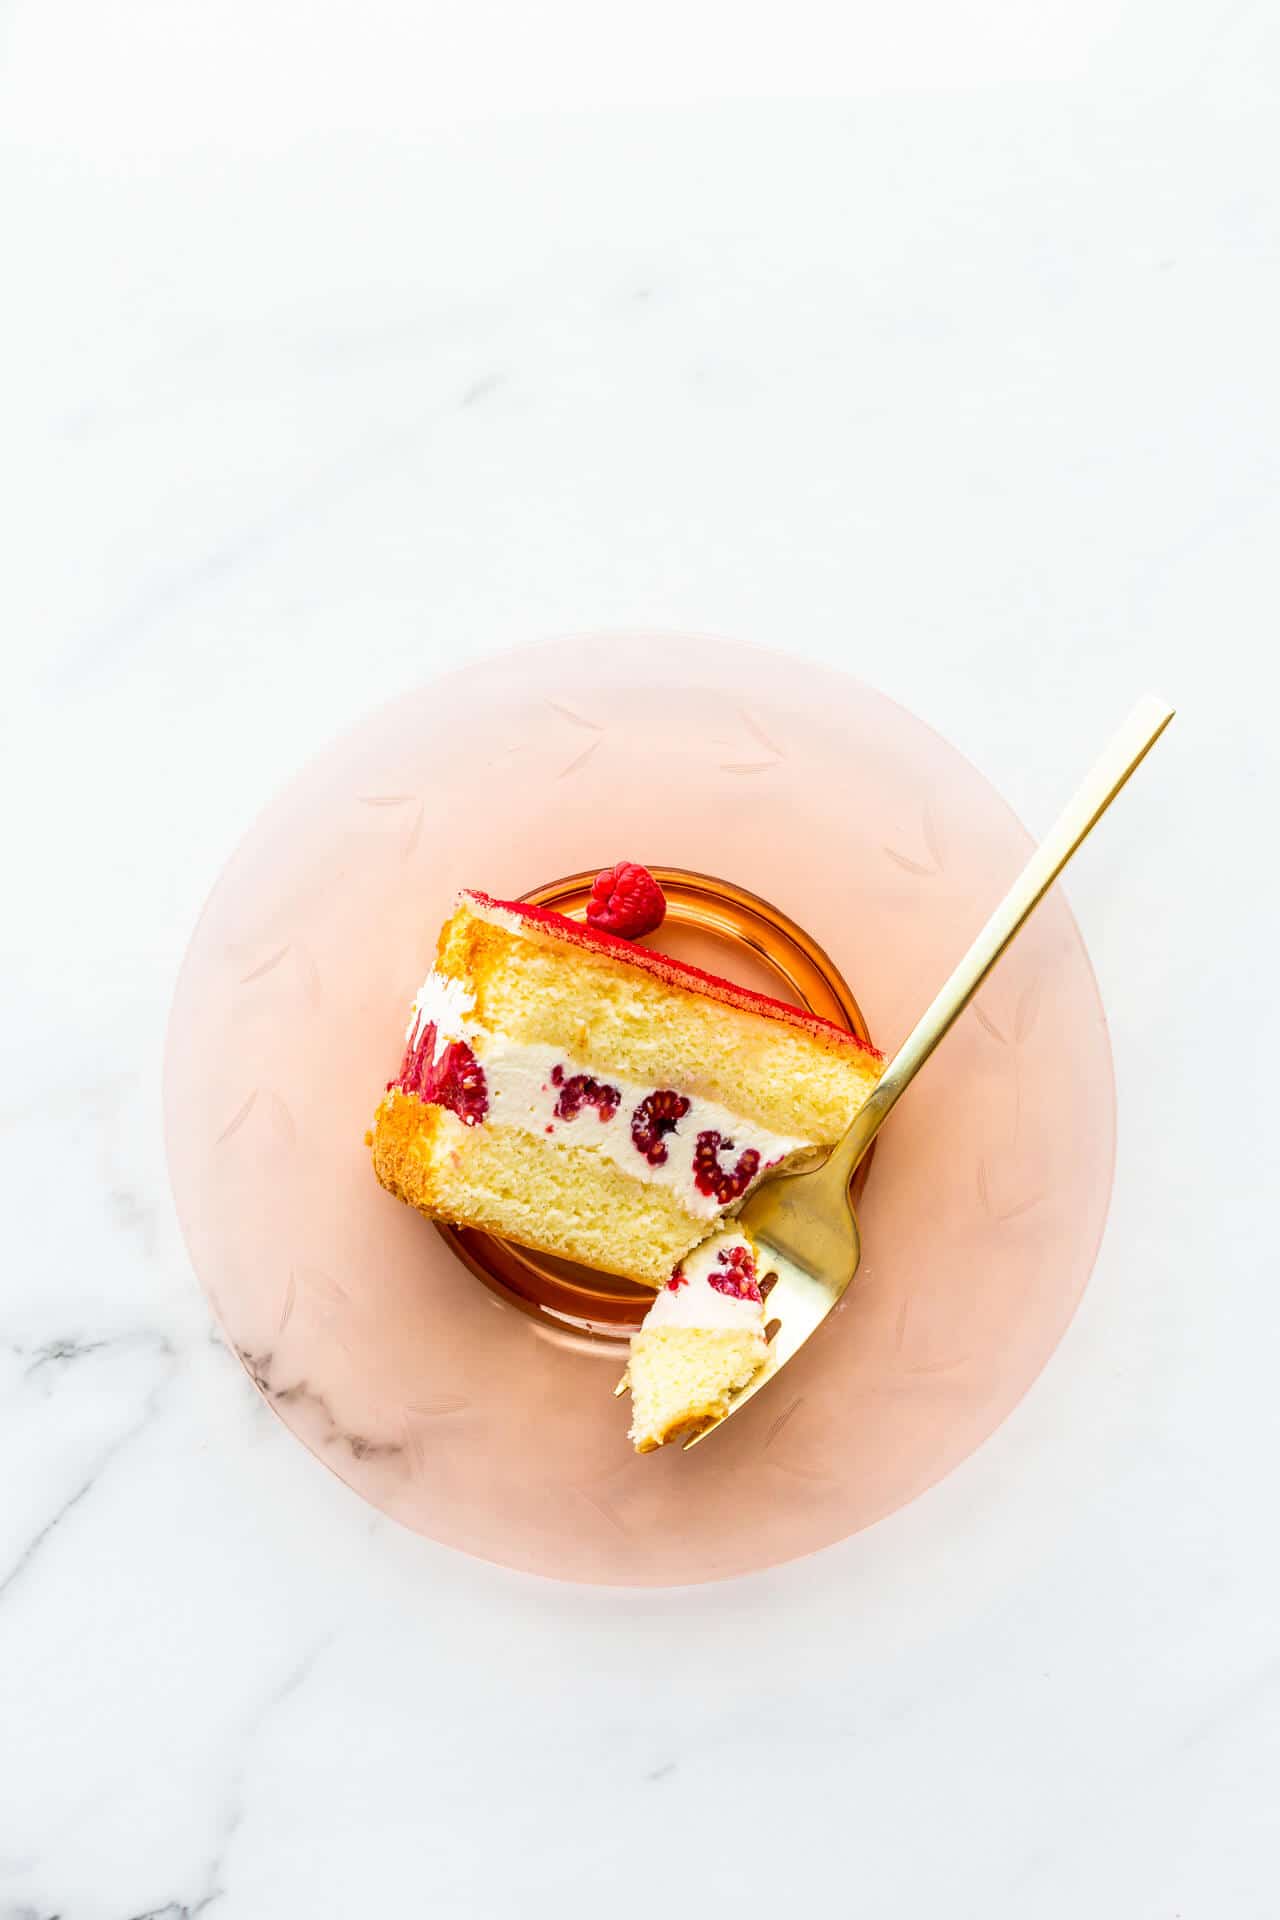 A slice of framboisier cake on a pink glass plate with a gold fork.